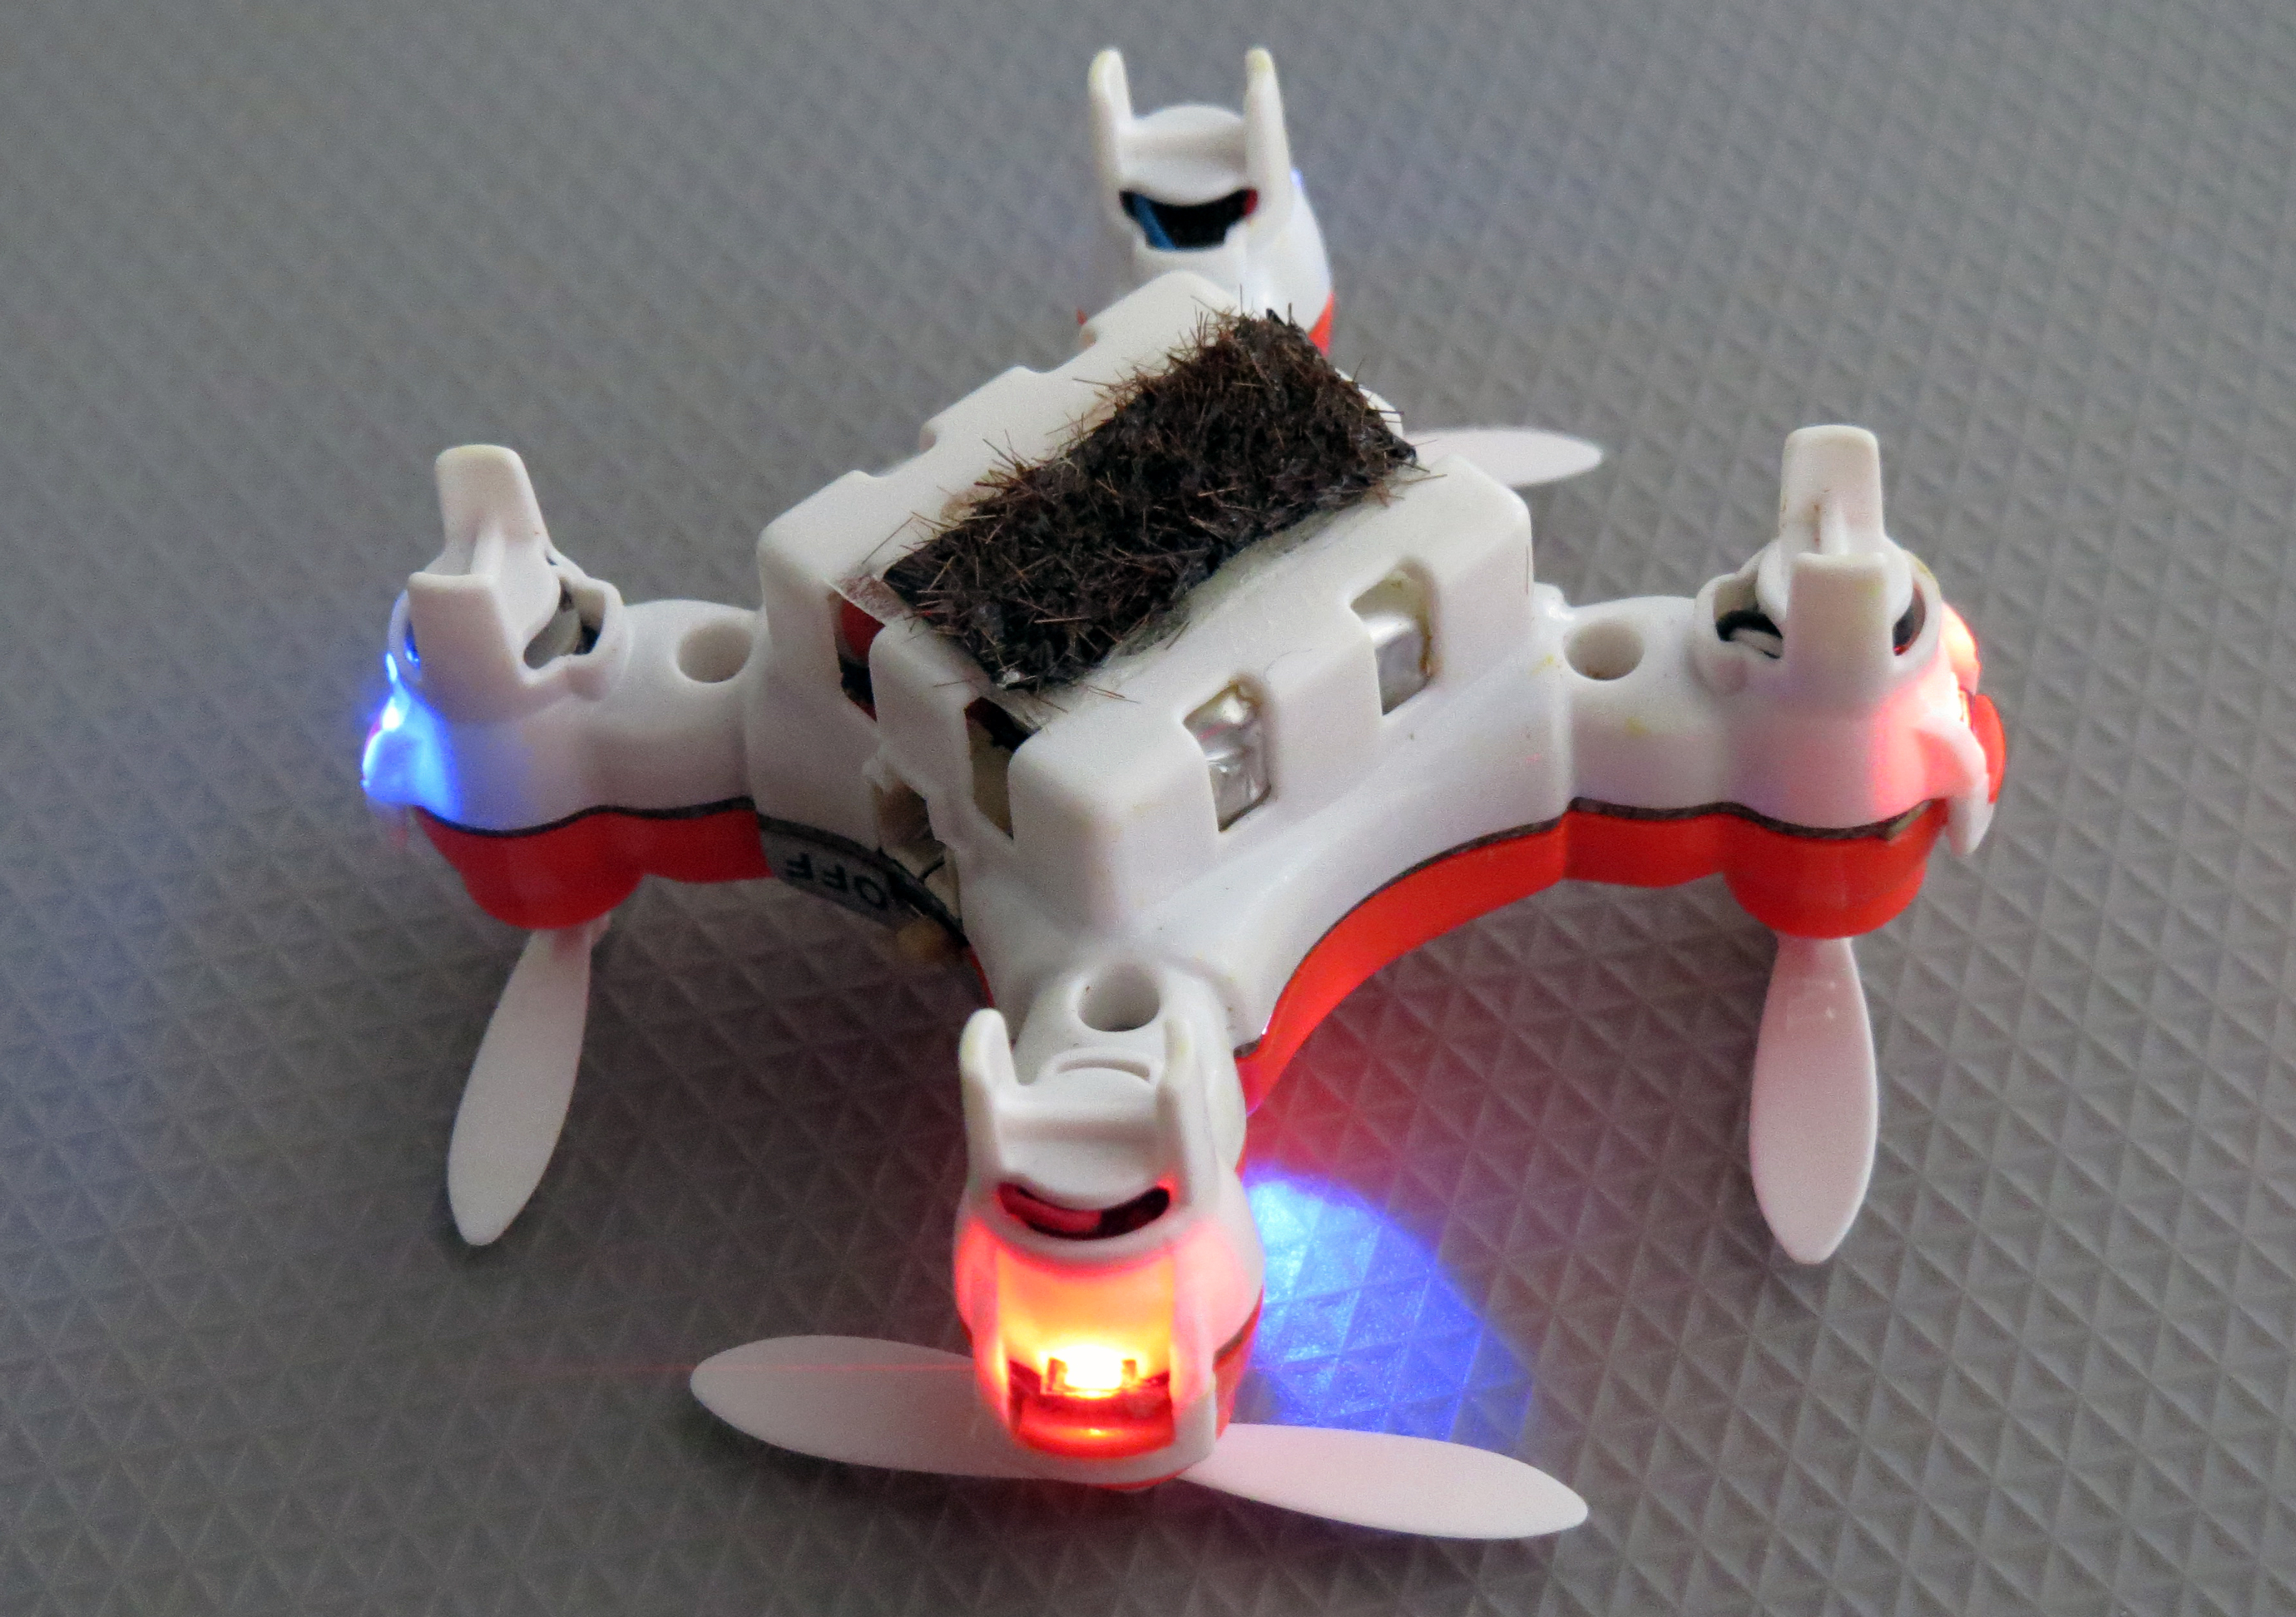 To create their artificial bee, Japanese scientists glued horsehair to the bottom of a $100 drone purchased from Amazon.com.